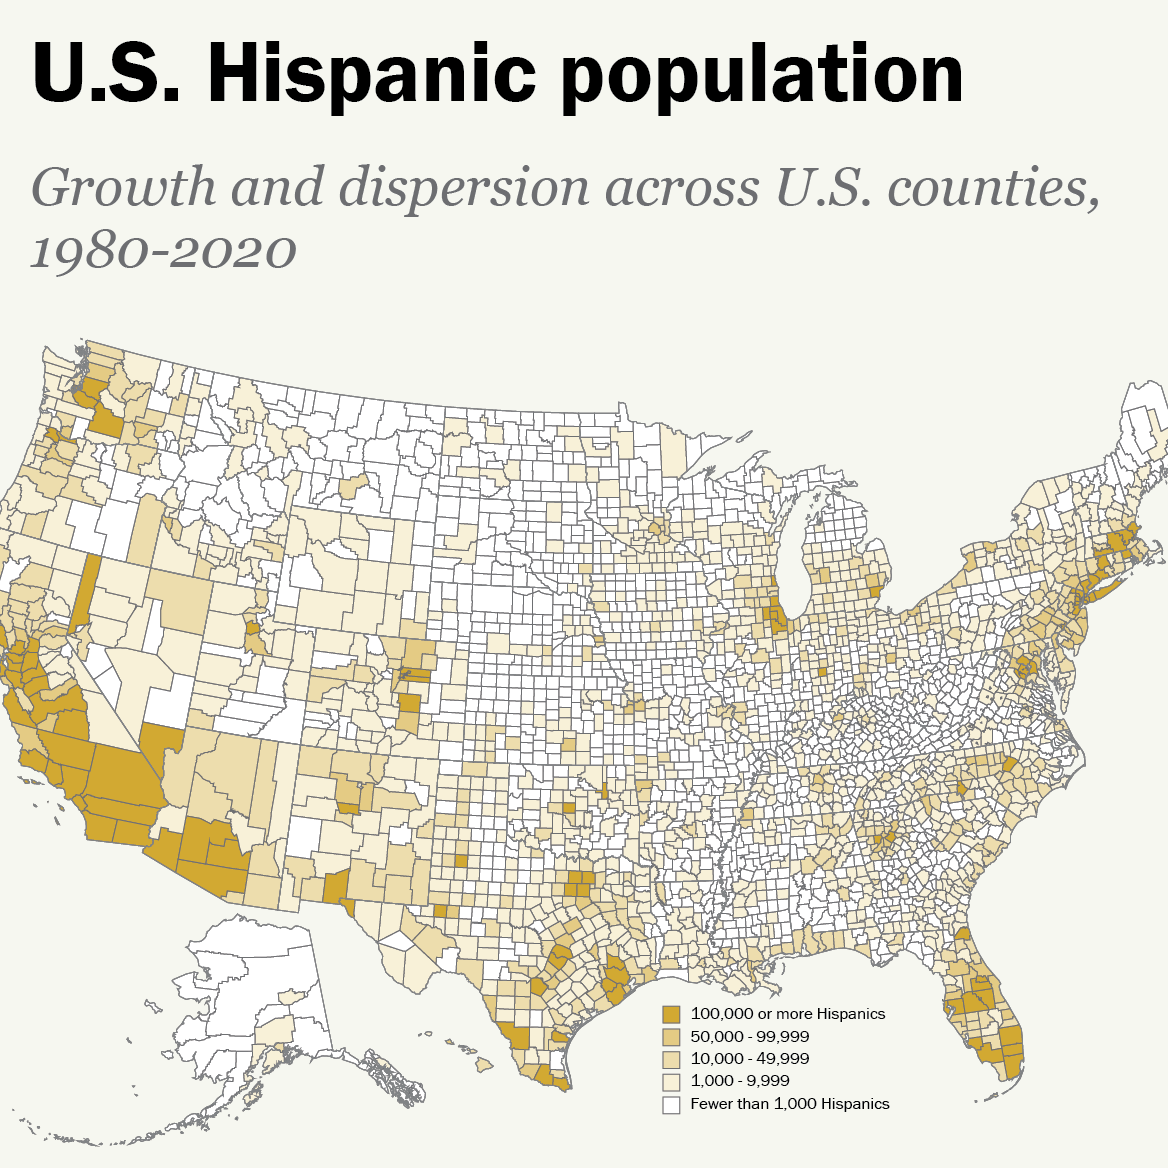 U.S. Hispanic population continued its geographic spread in the 2010s